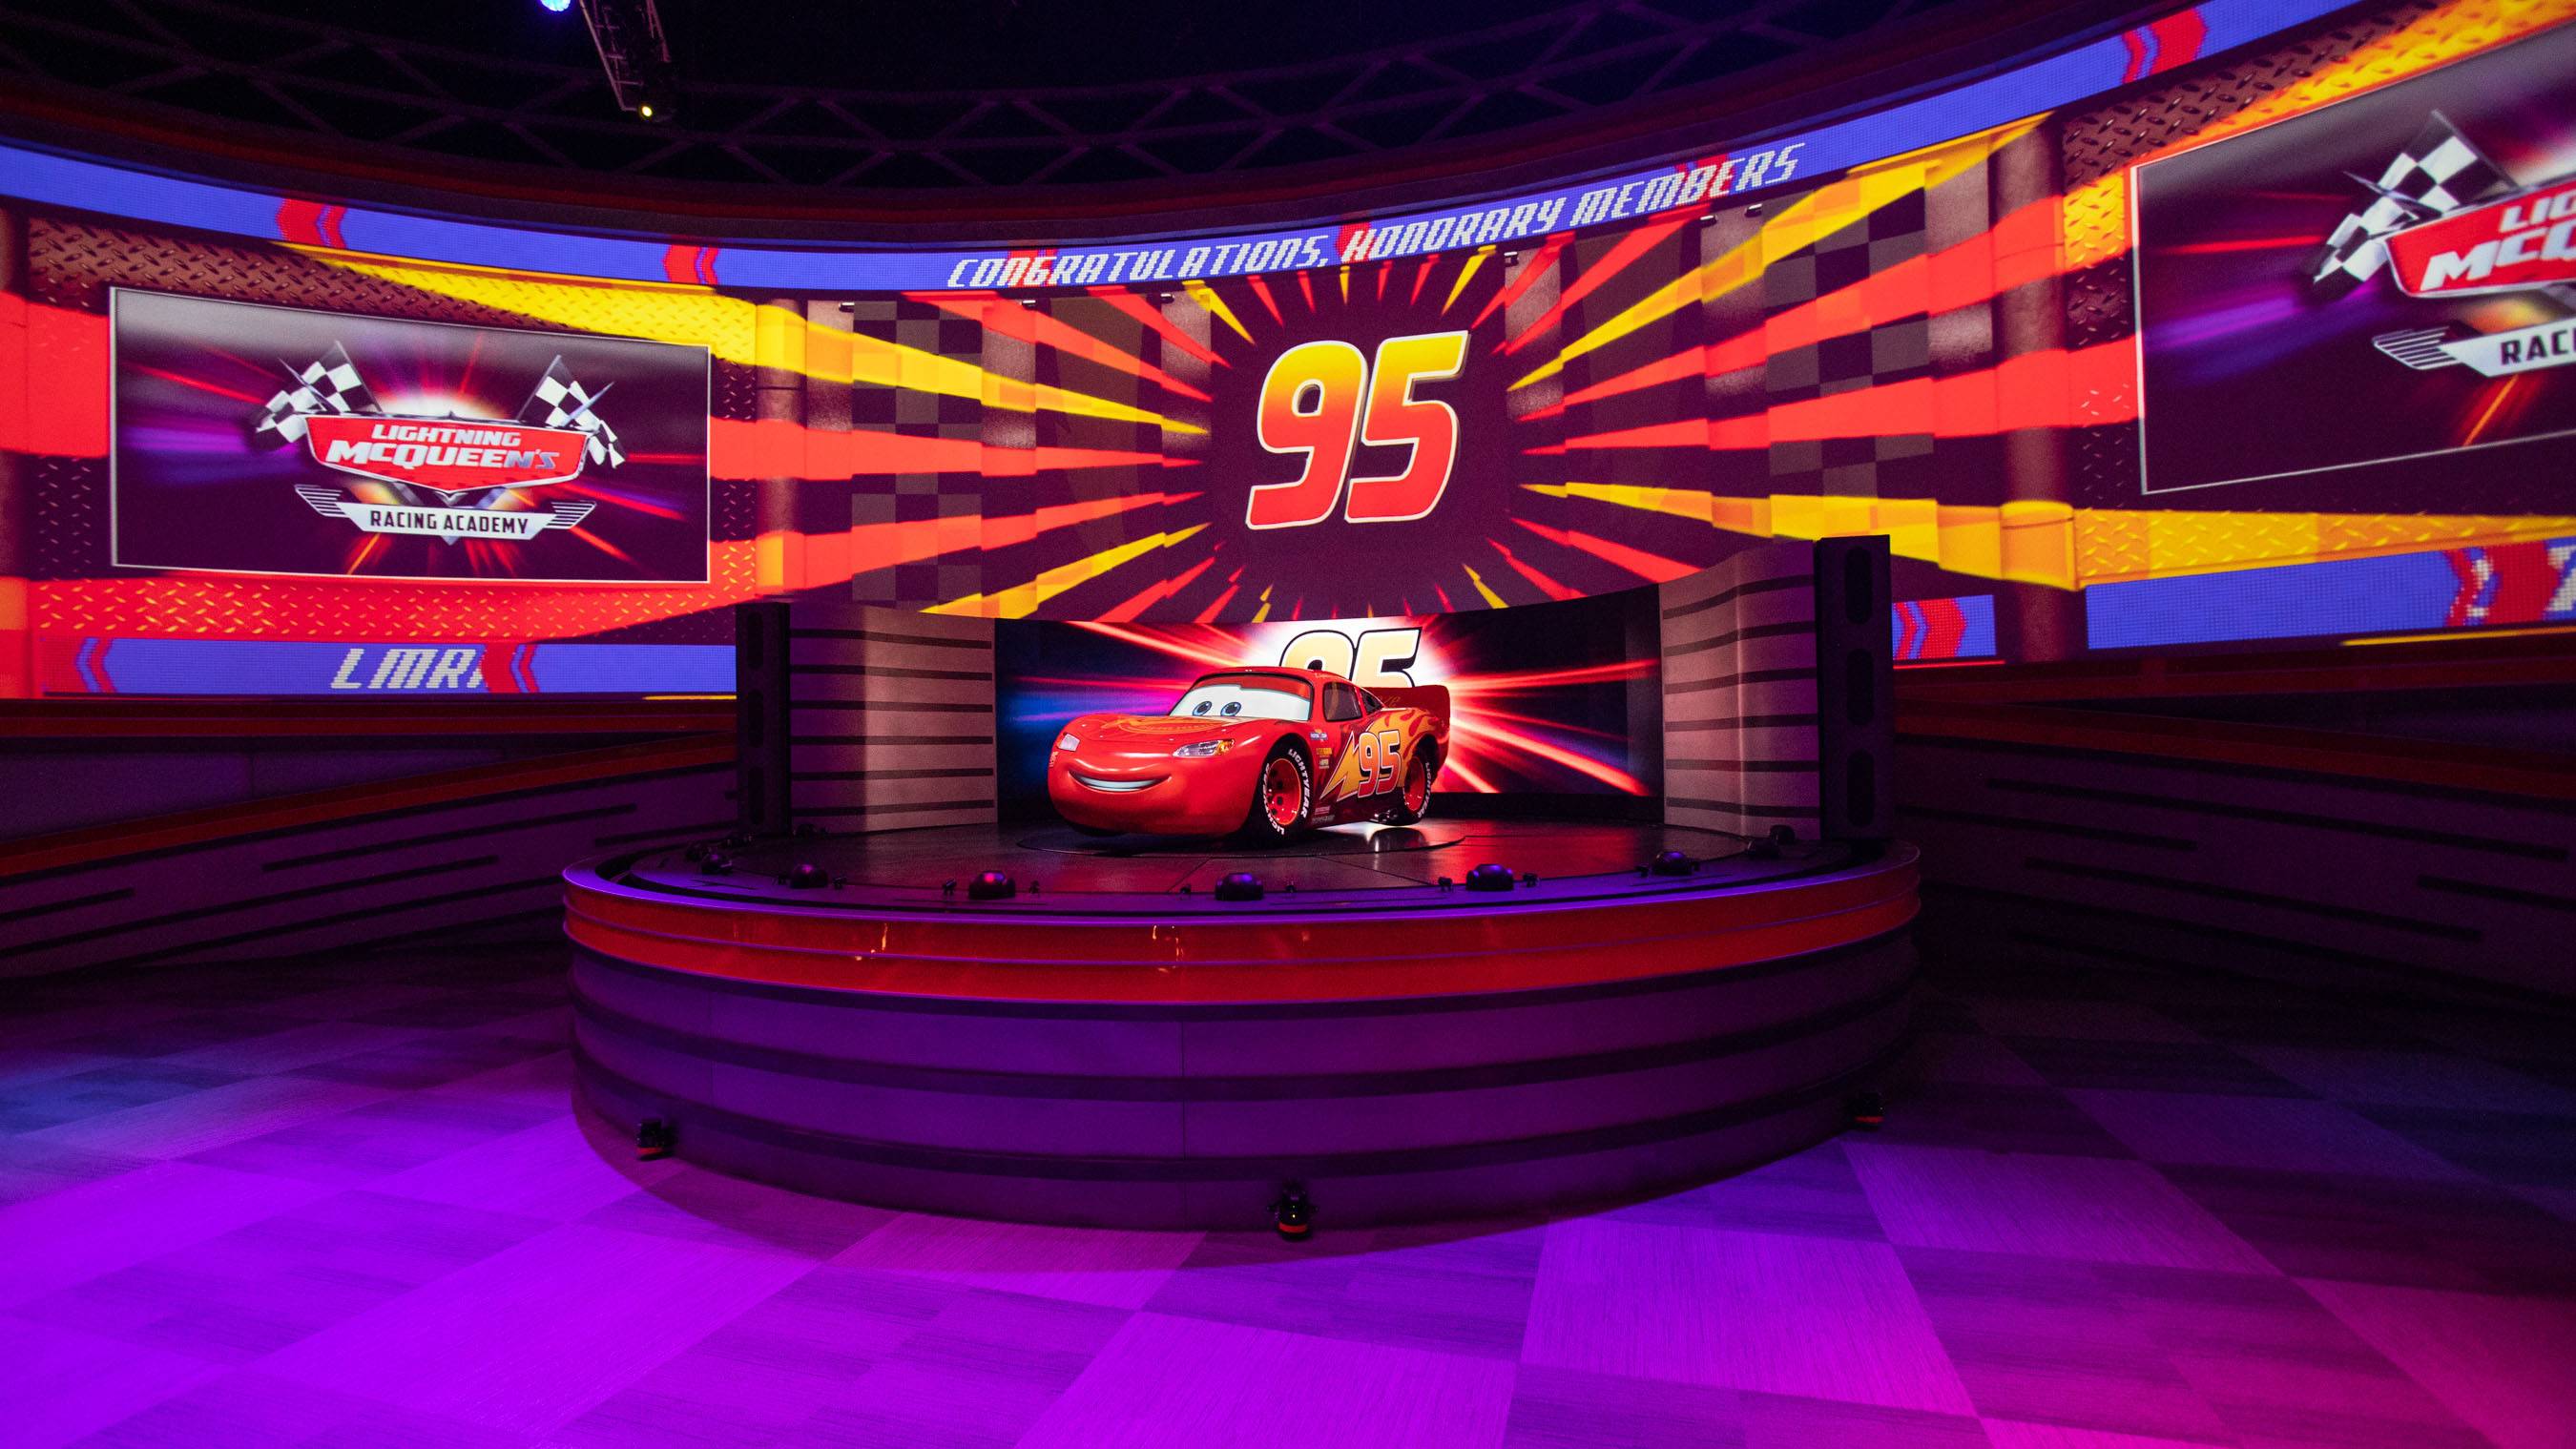 Lightning McQueen's Racing Academy reopens after extended downtime